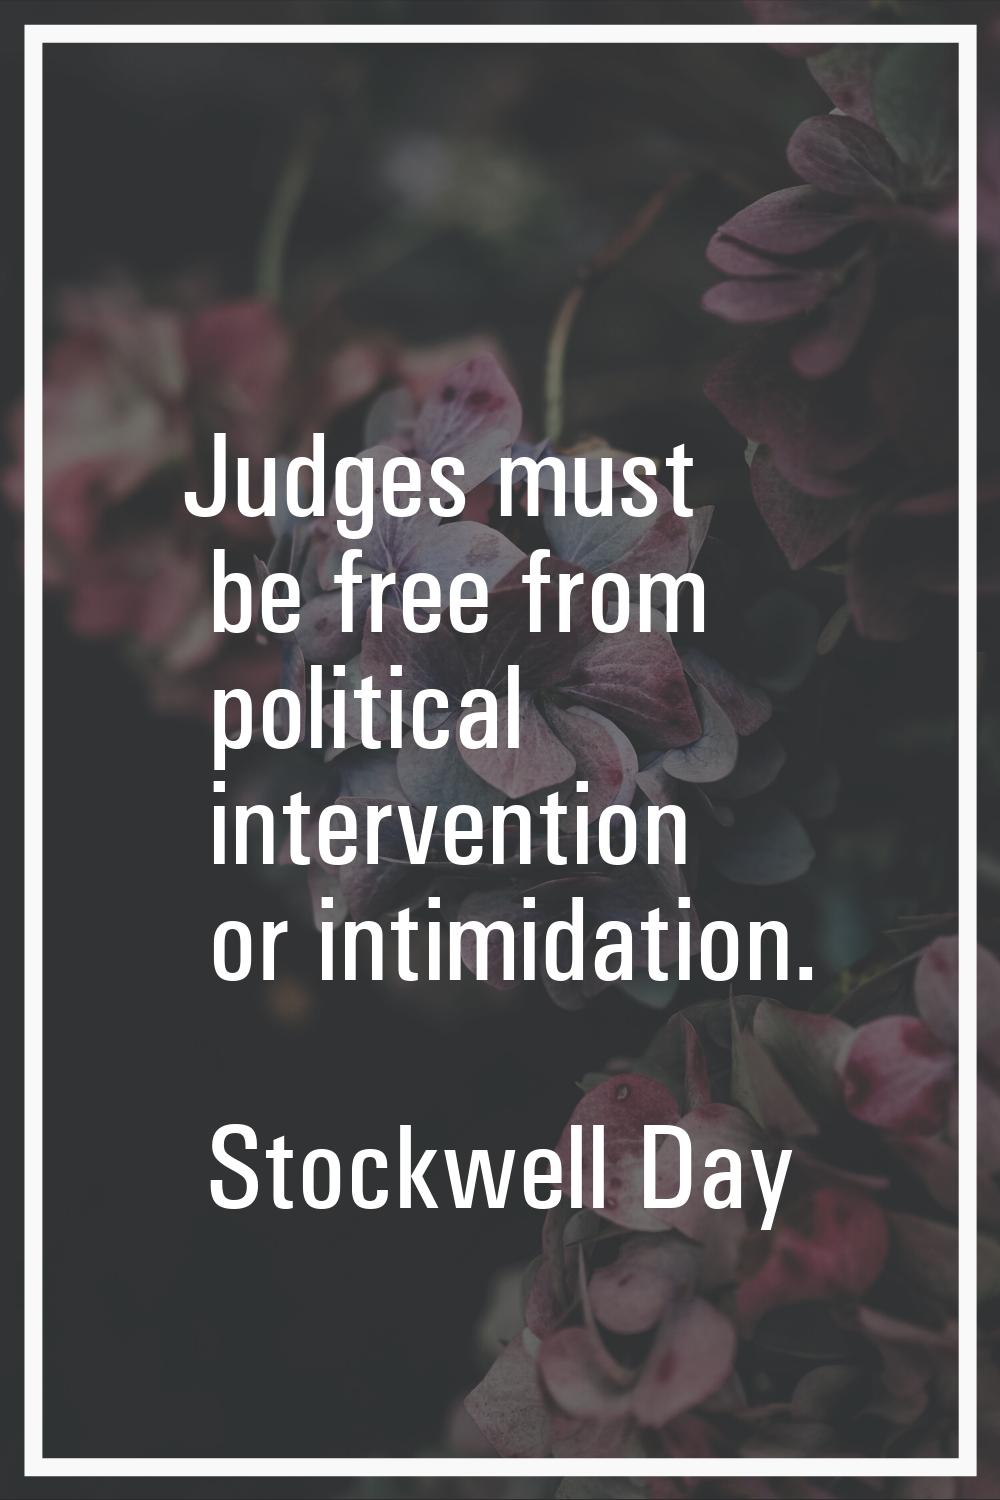 Judges must be free from political intervention or intimidation.